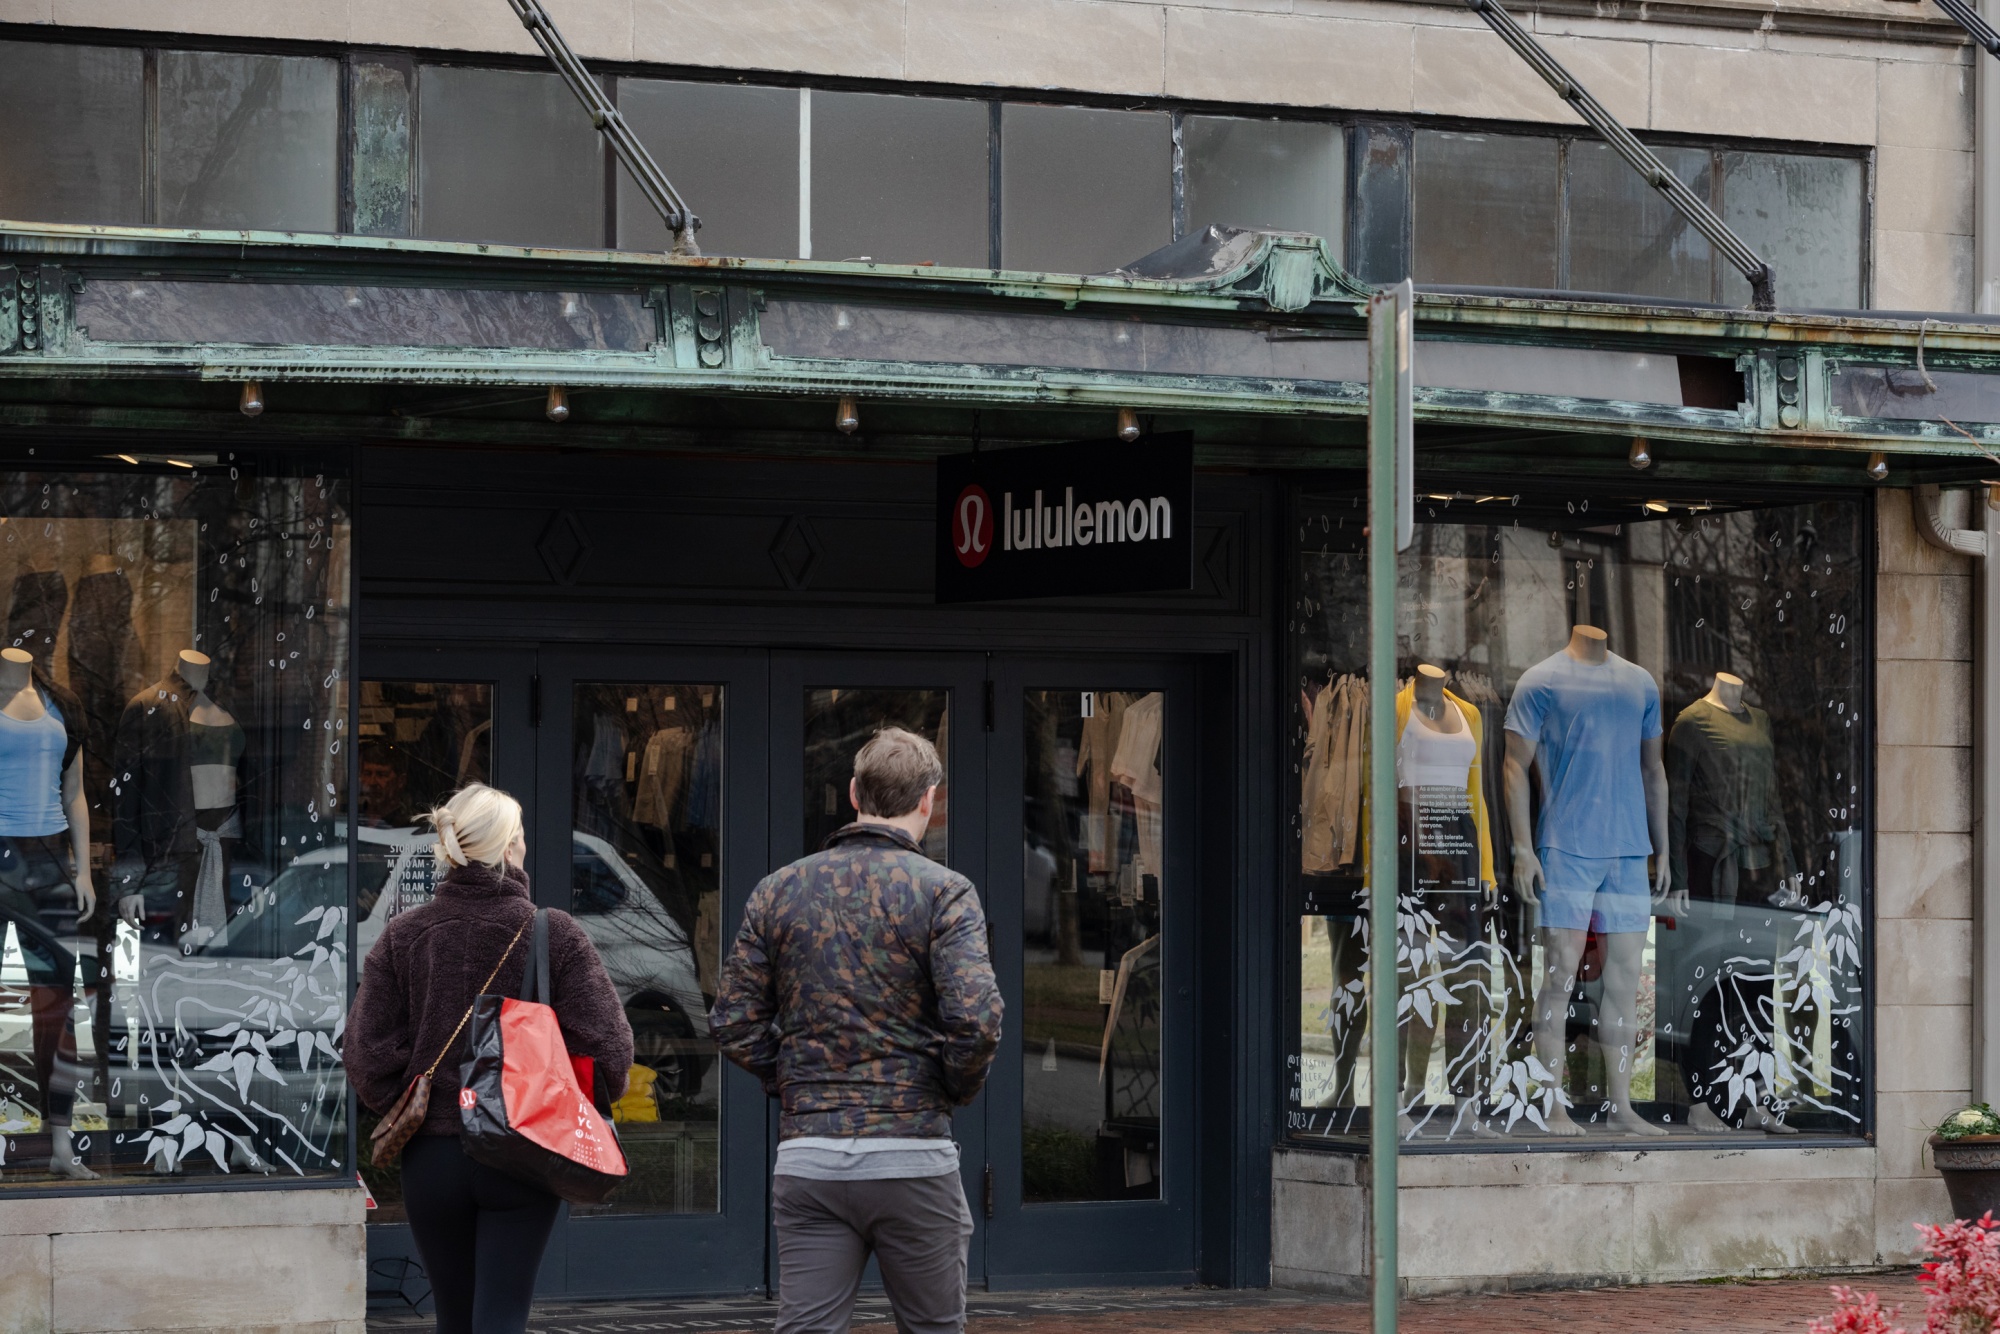 Lululemon Takes an Upward Facing-Dog on Fabric Made from Recycled Emissions